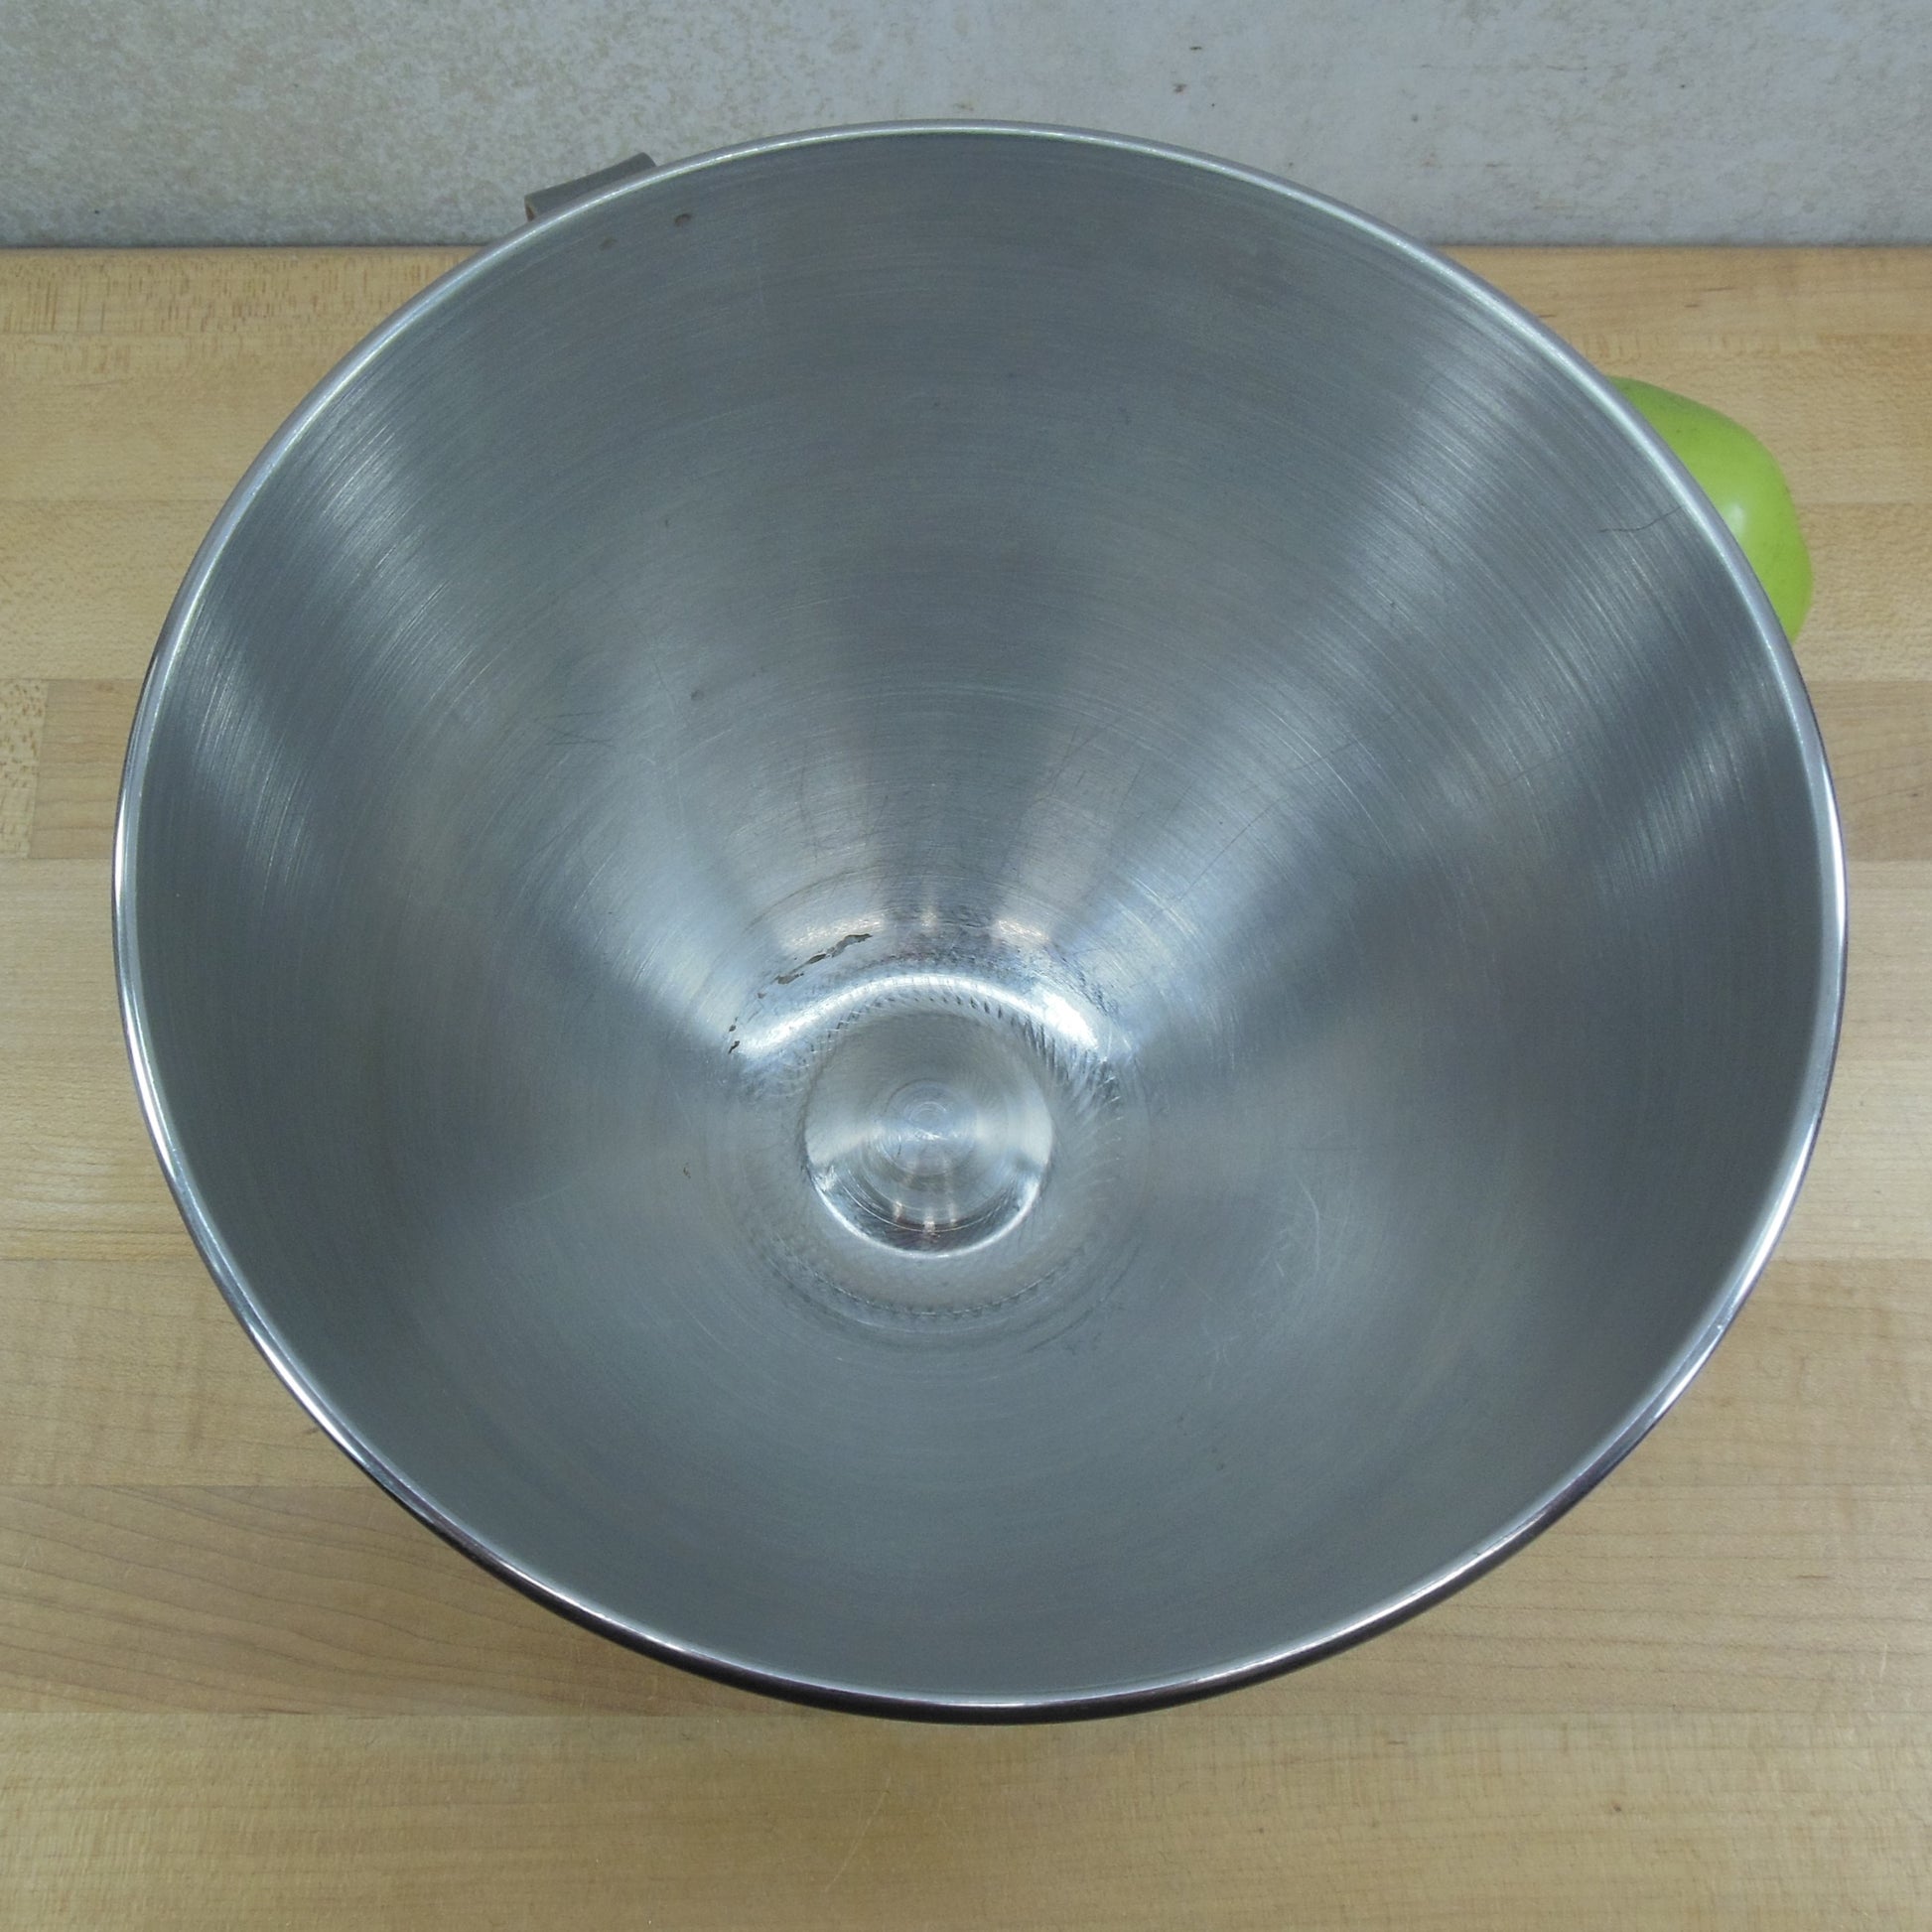 Buy the KitchenAid K45 Stainless Steel Mixing Bowl for Countertop Mixers